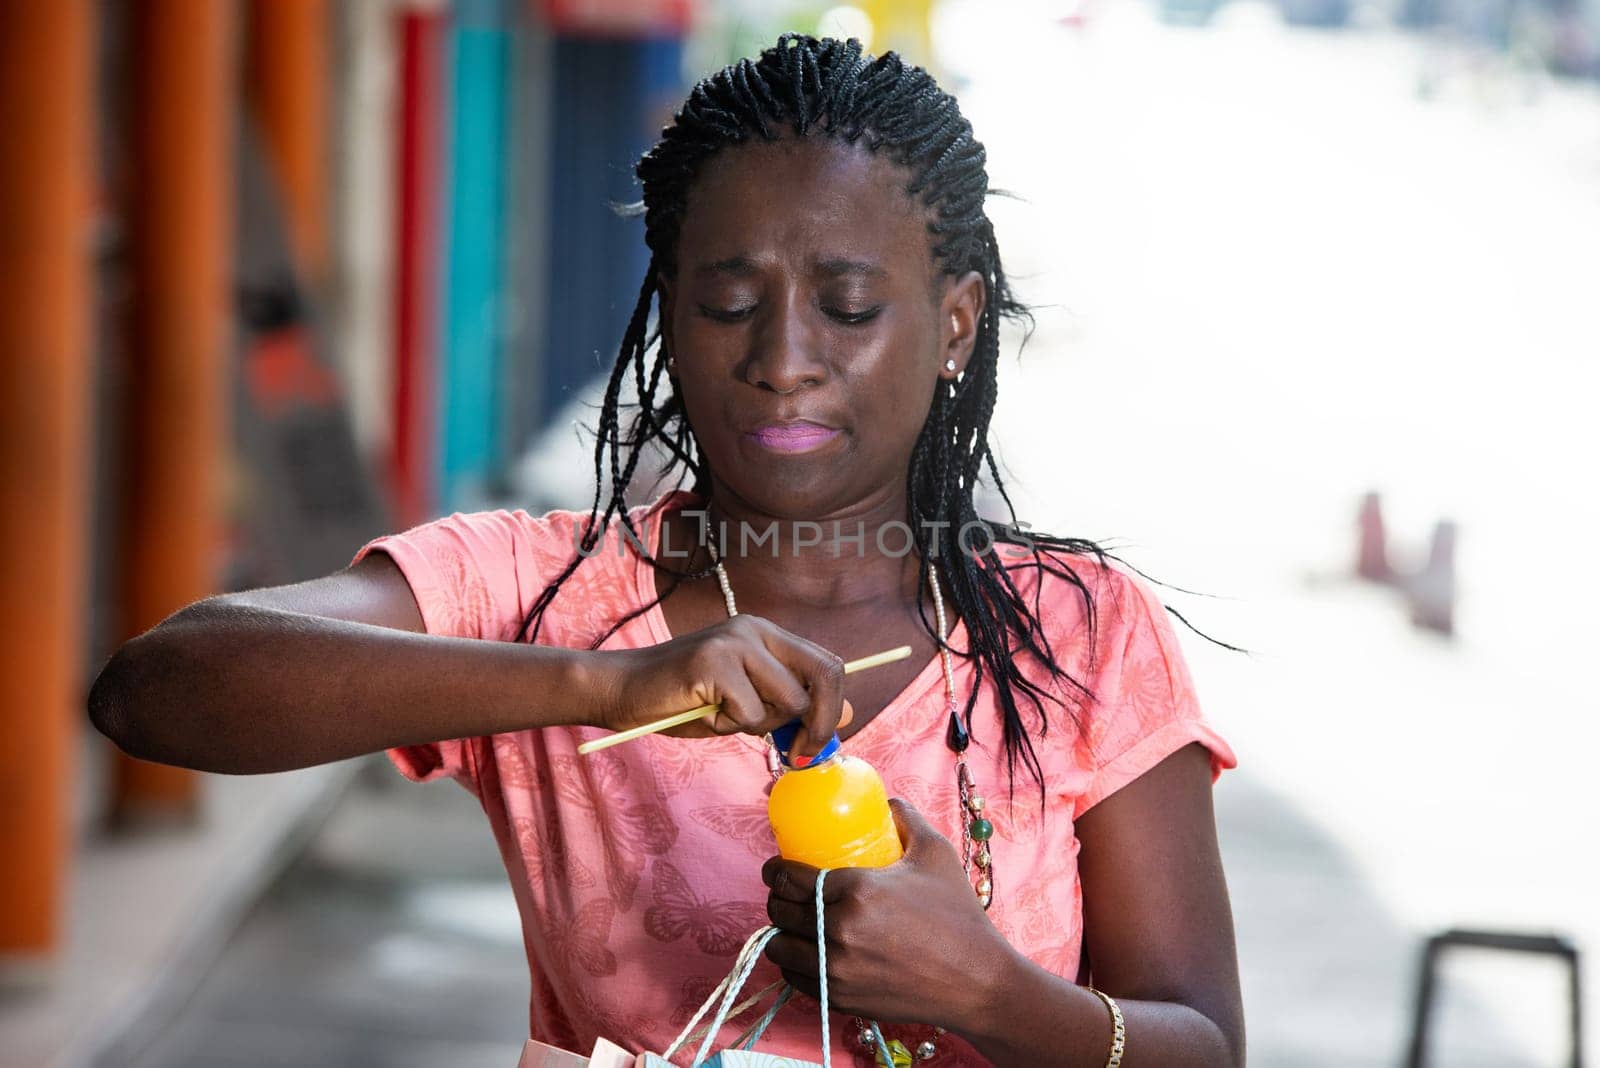 young girl standing outdoors opening a bottle of fruit juice.